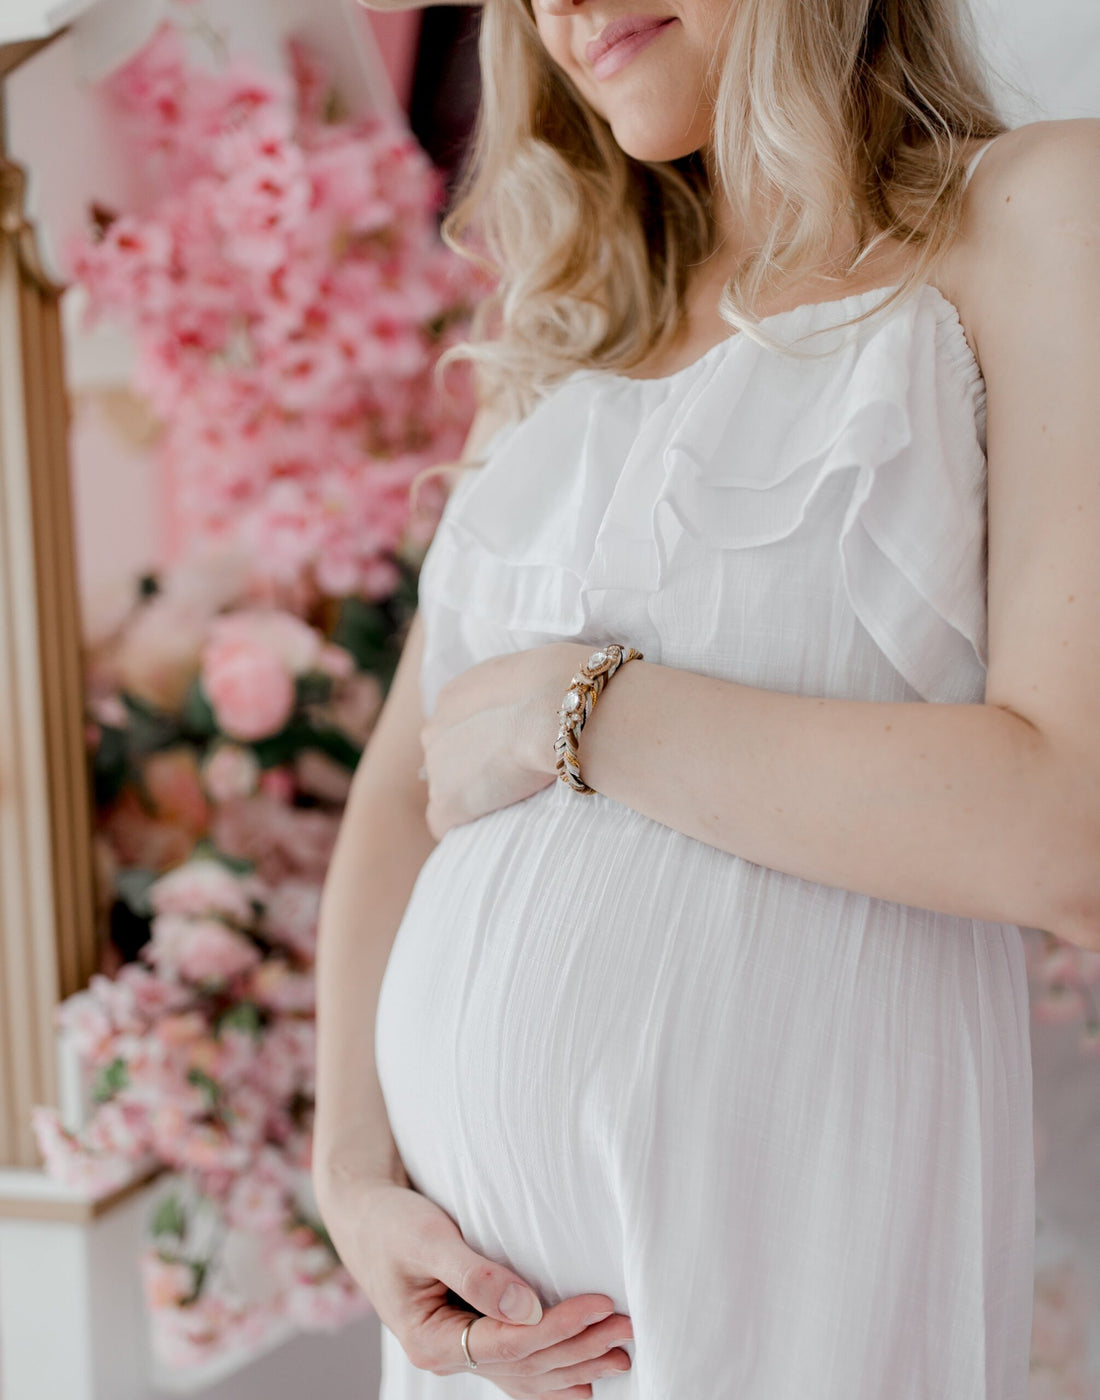 pregnant-woman-in-a-white-dress-holds-her-belly